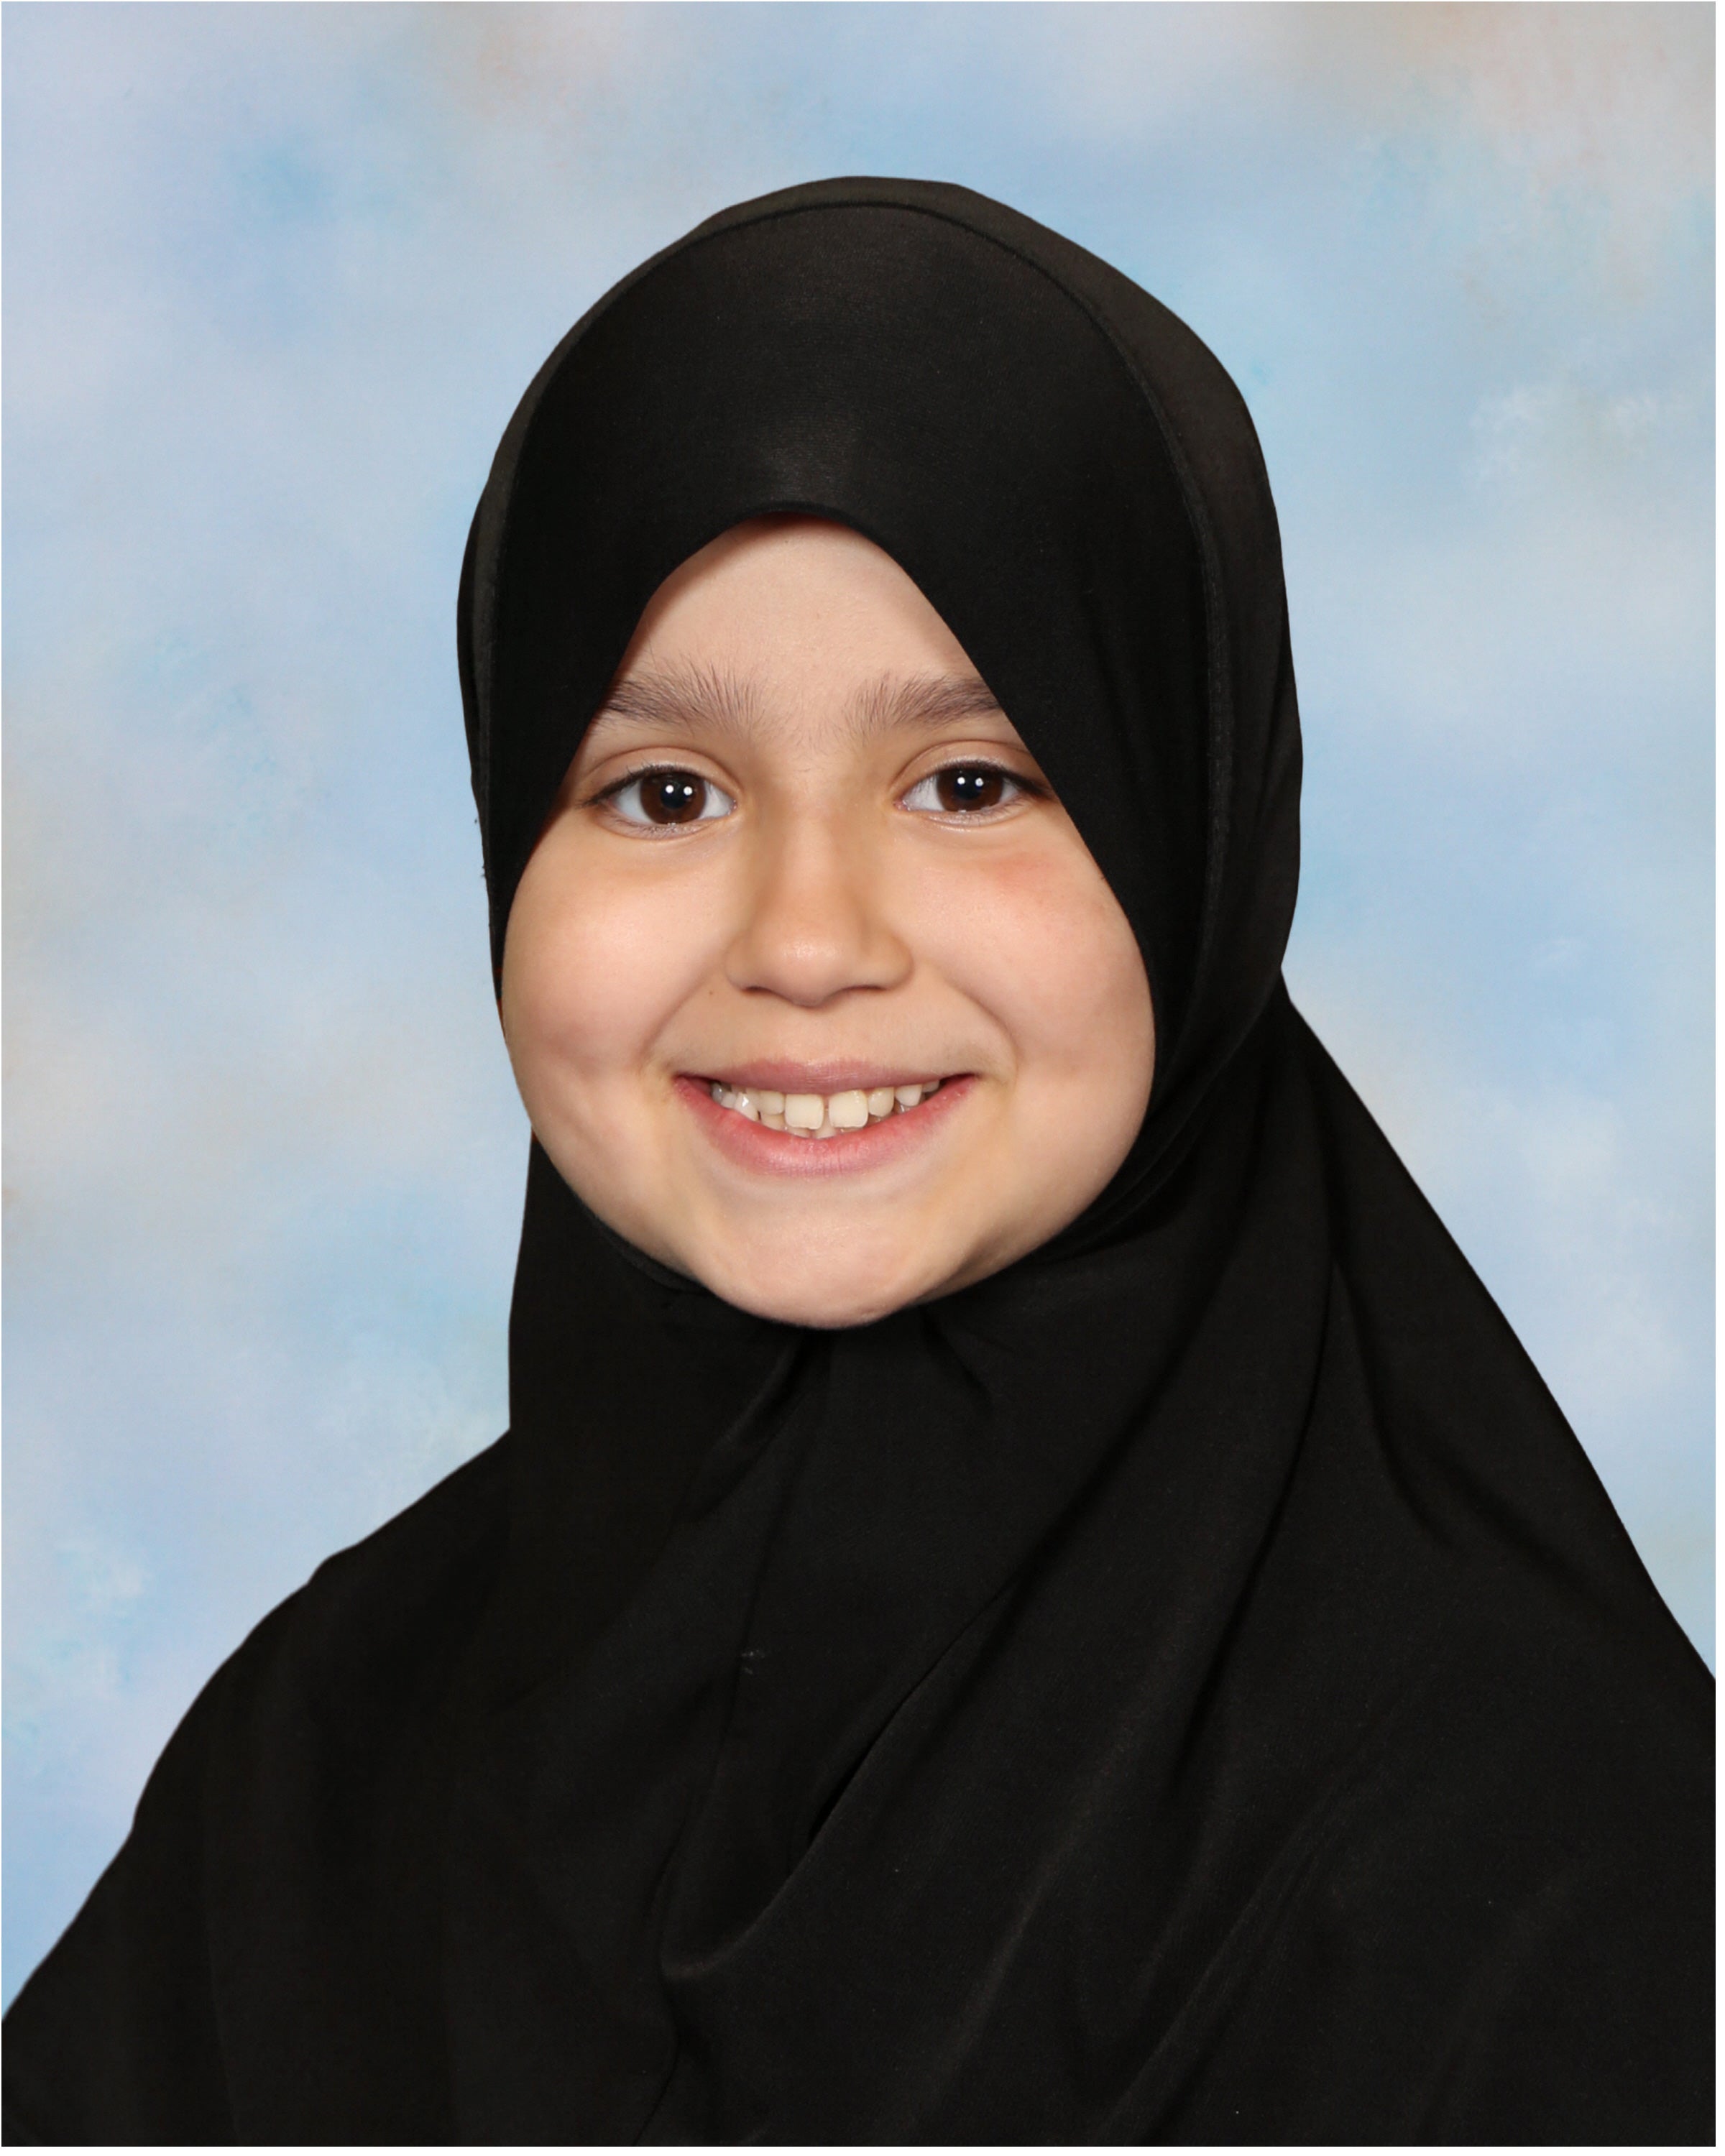 This school photo of Sara is believed to have been taken within the last year